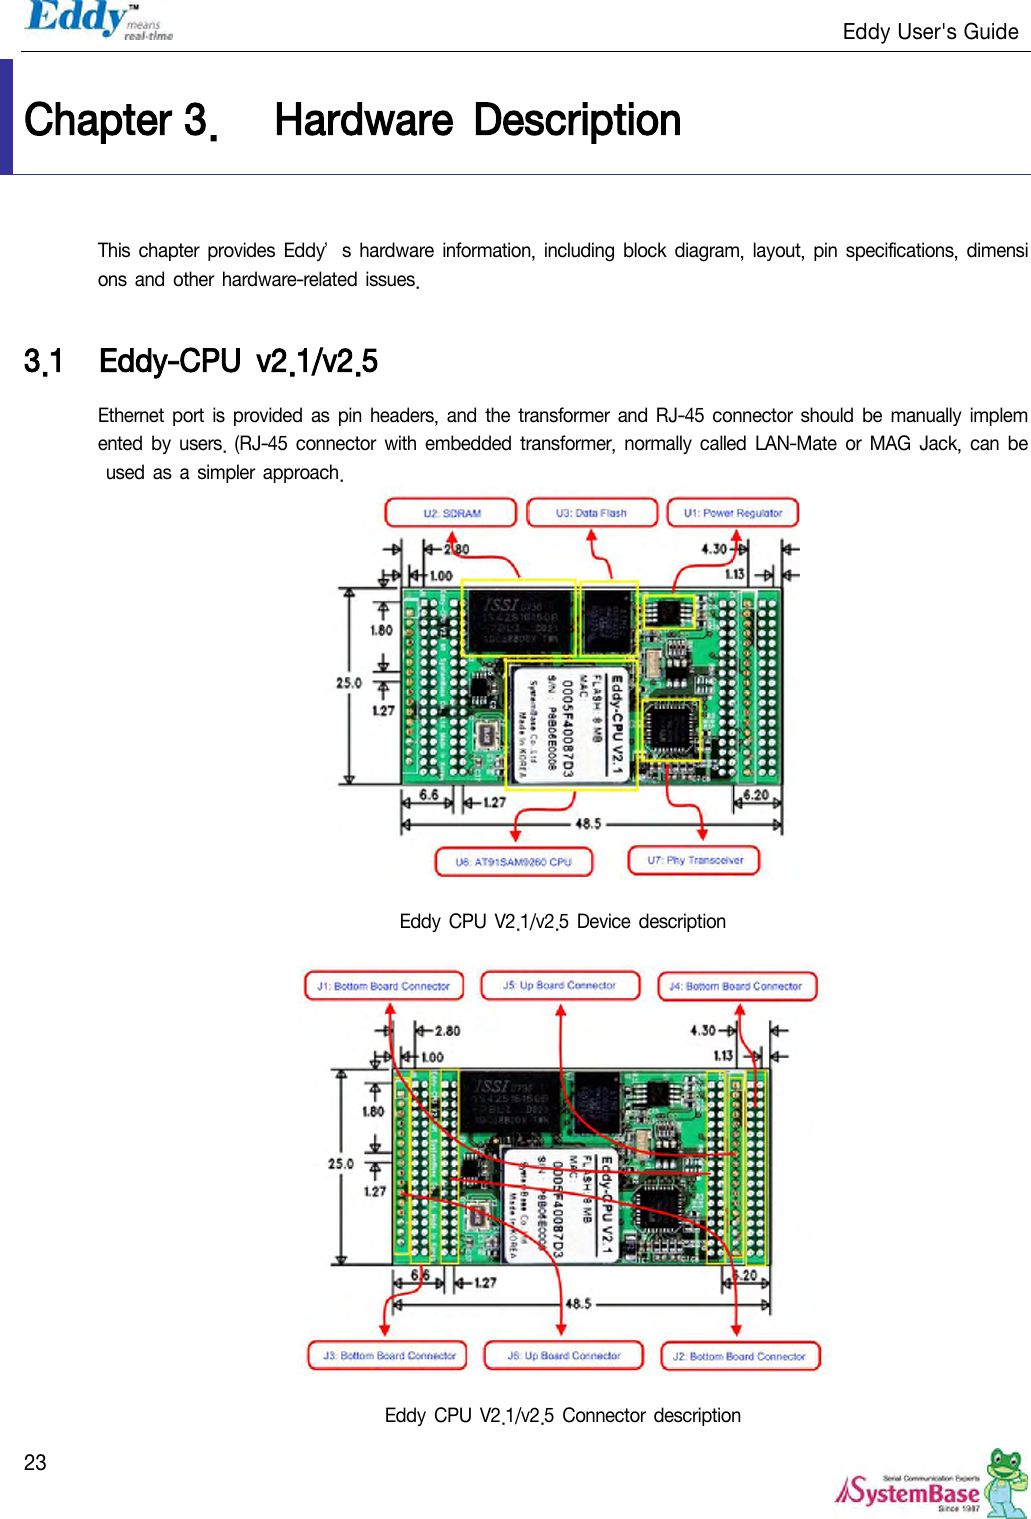                                                                   Eddy User&apos;s Guide   23 Chapter 3. Hardware  Description This chapter  provides  Eddy’s hardware  information, including  block  diagram,  layout, pin  specifications, dimensions  and other  hardware-related issues.  3.1 Eddy-CPU  v2.1/v2.5 Ethernet  port  is provided as pin headers,  and the transformer and RJ-45  connector should be  manually  implemented  by users.  (RJ-45 connector with embedded transformer, normally  called  LAN-Mate or  MAG  Jack, can  be used  as  a simpler  approach.   Eddy CPU V2.1/v2.5 Device description    Eddy CPU V2.1/v2.5  Connector description 